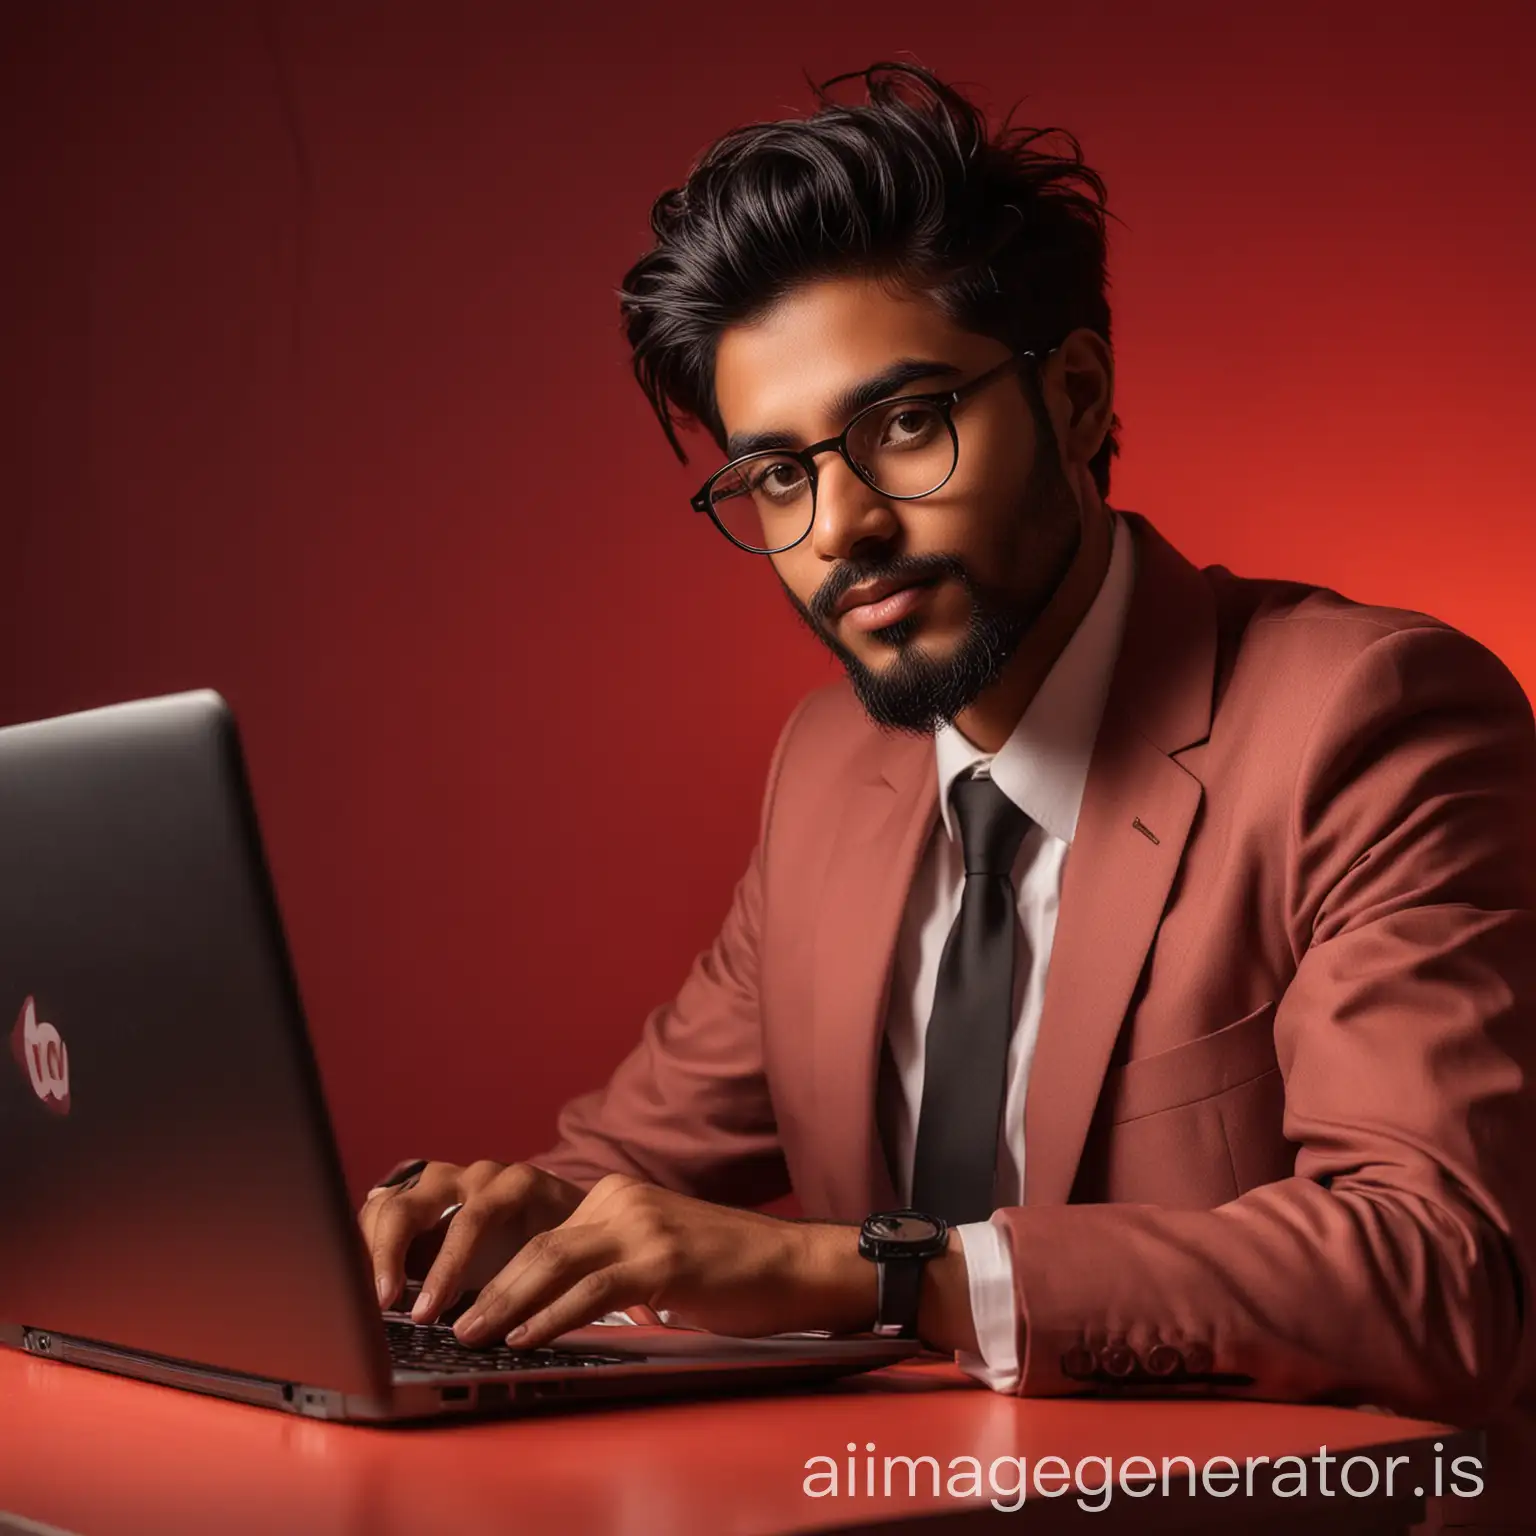 Young-Indian-Man-in-Formal-Attire-Using-Laptop-with-Red-Backlight